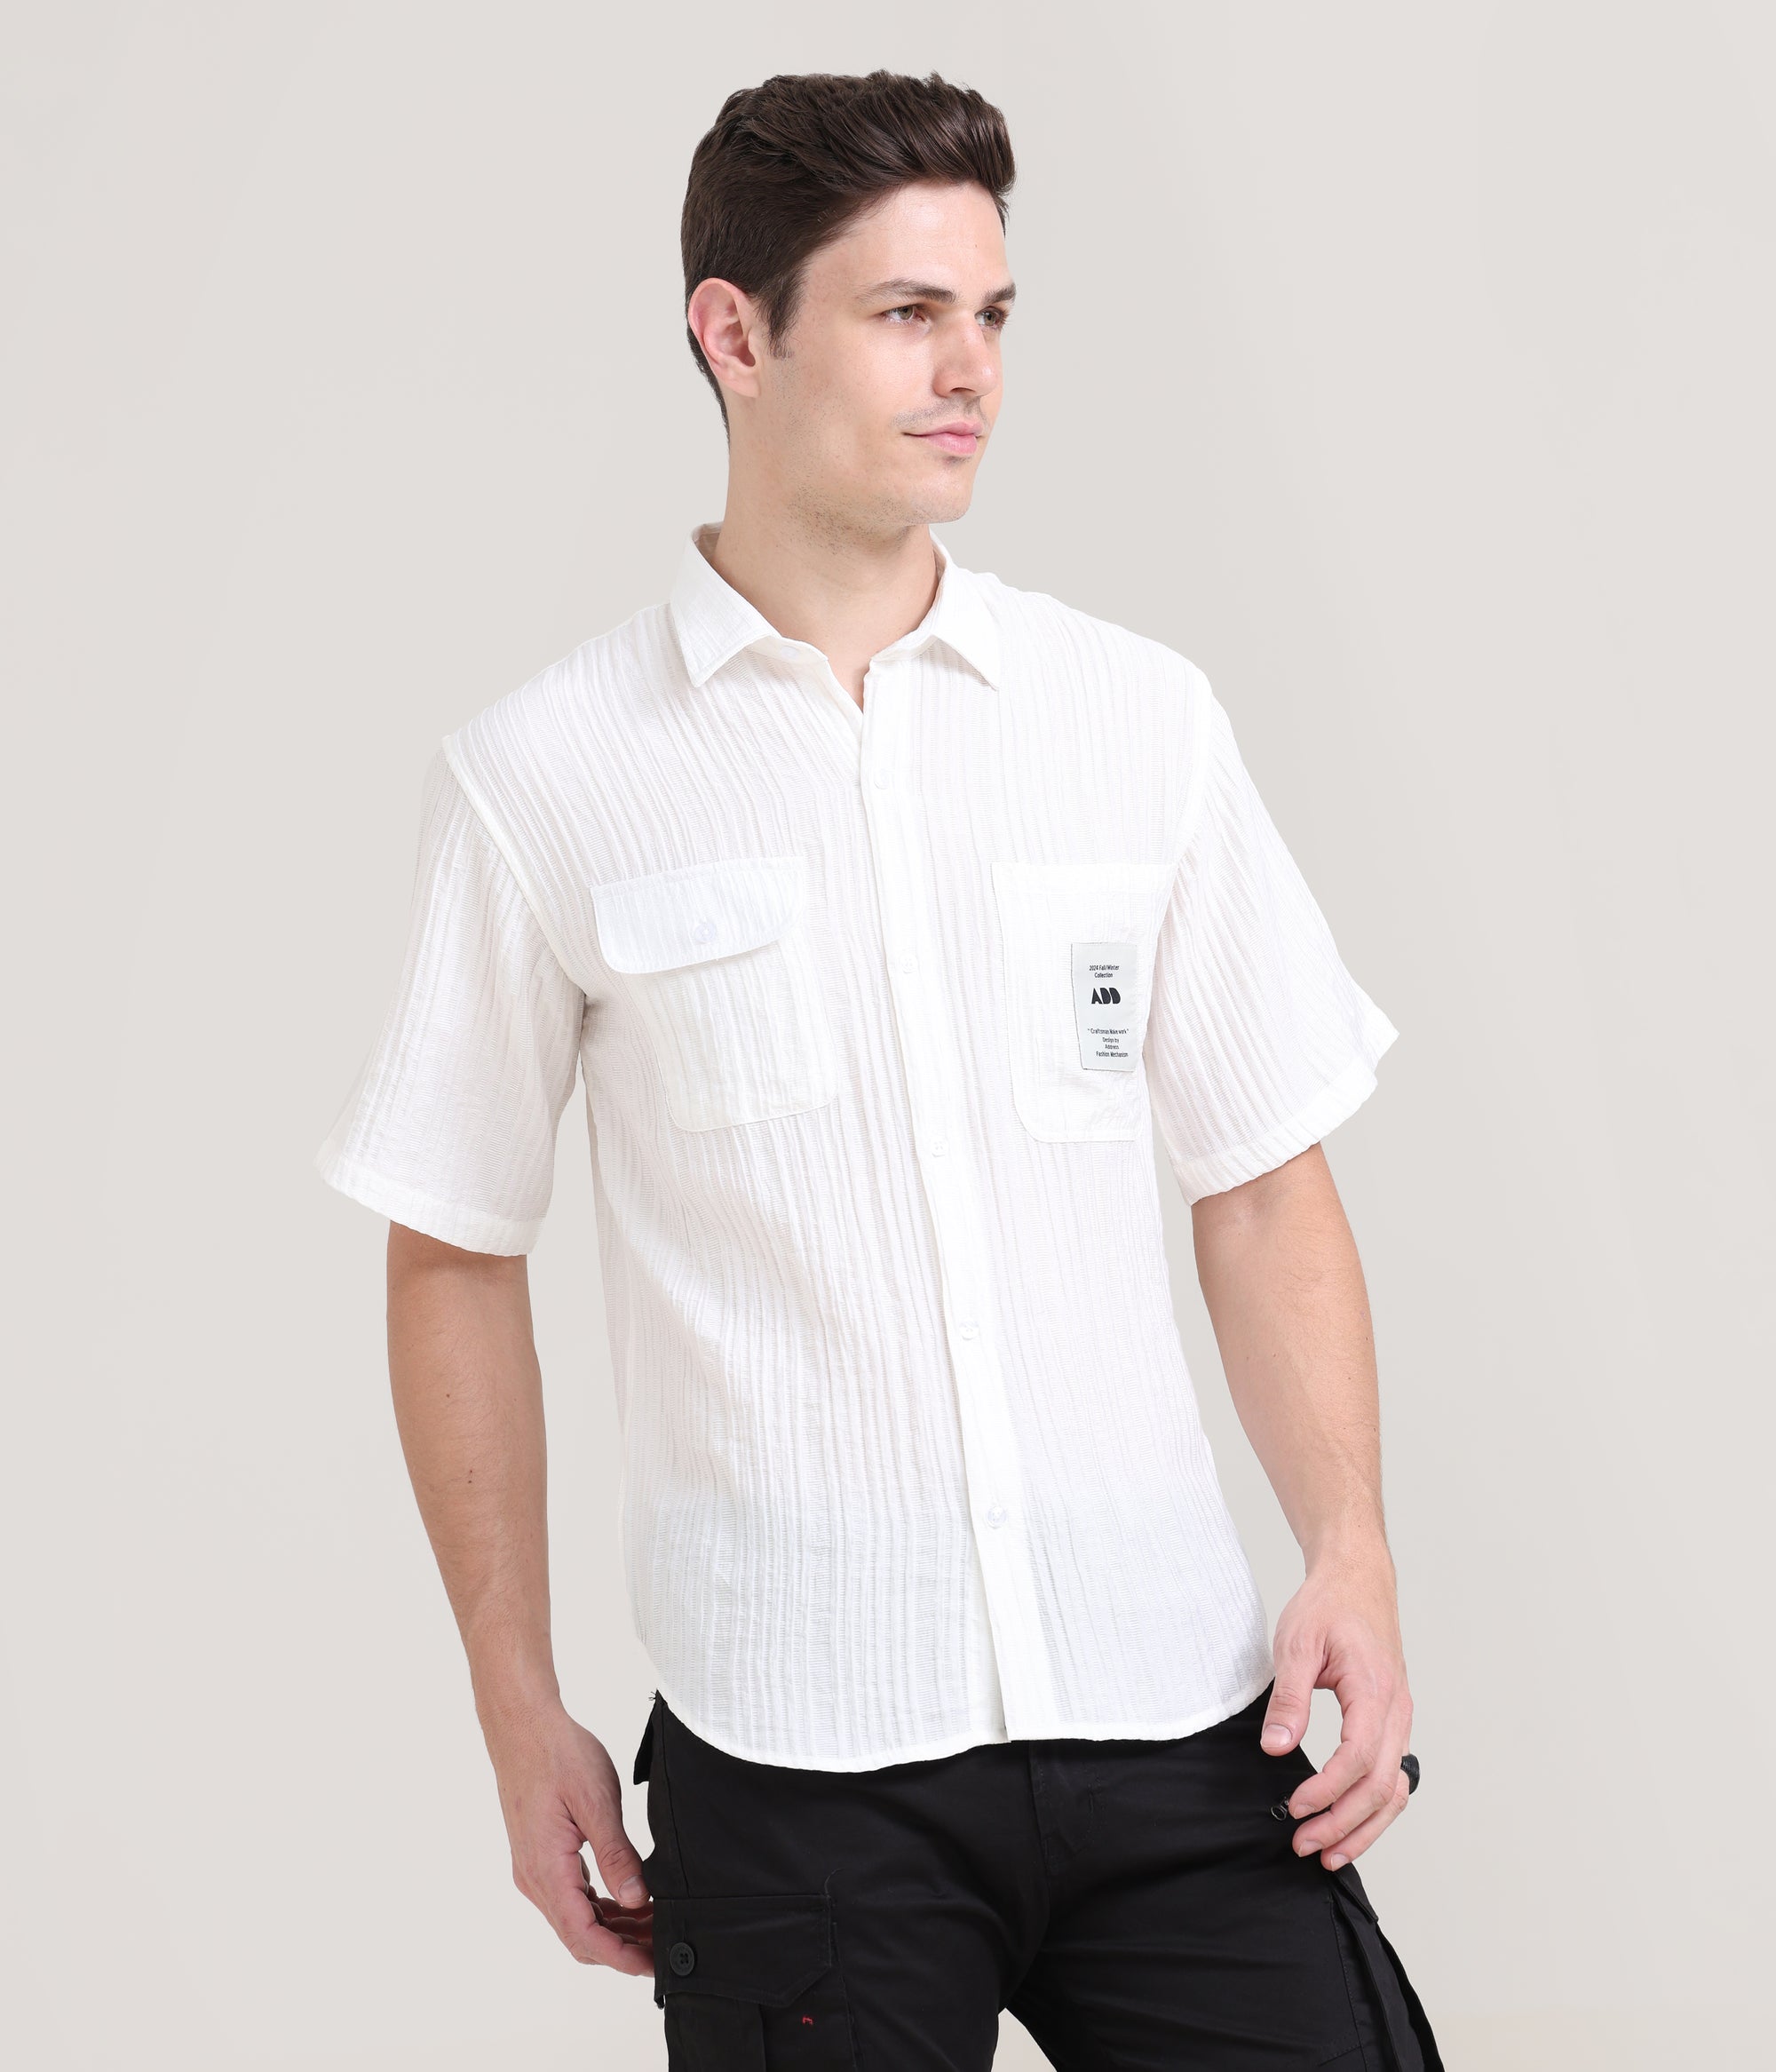 Snowy Comfort: Solid White Oversized Half Sleeve Double Pocket Shirt